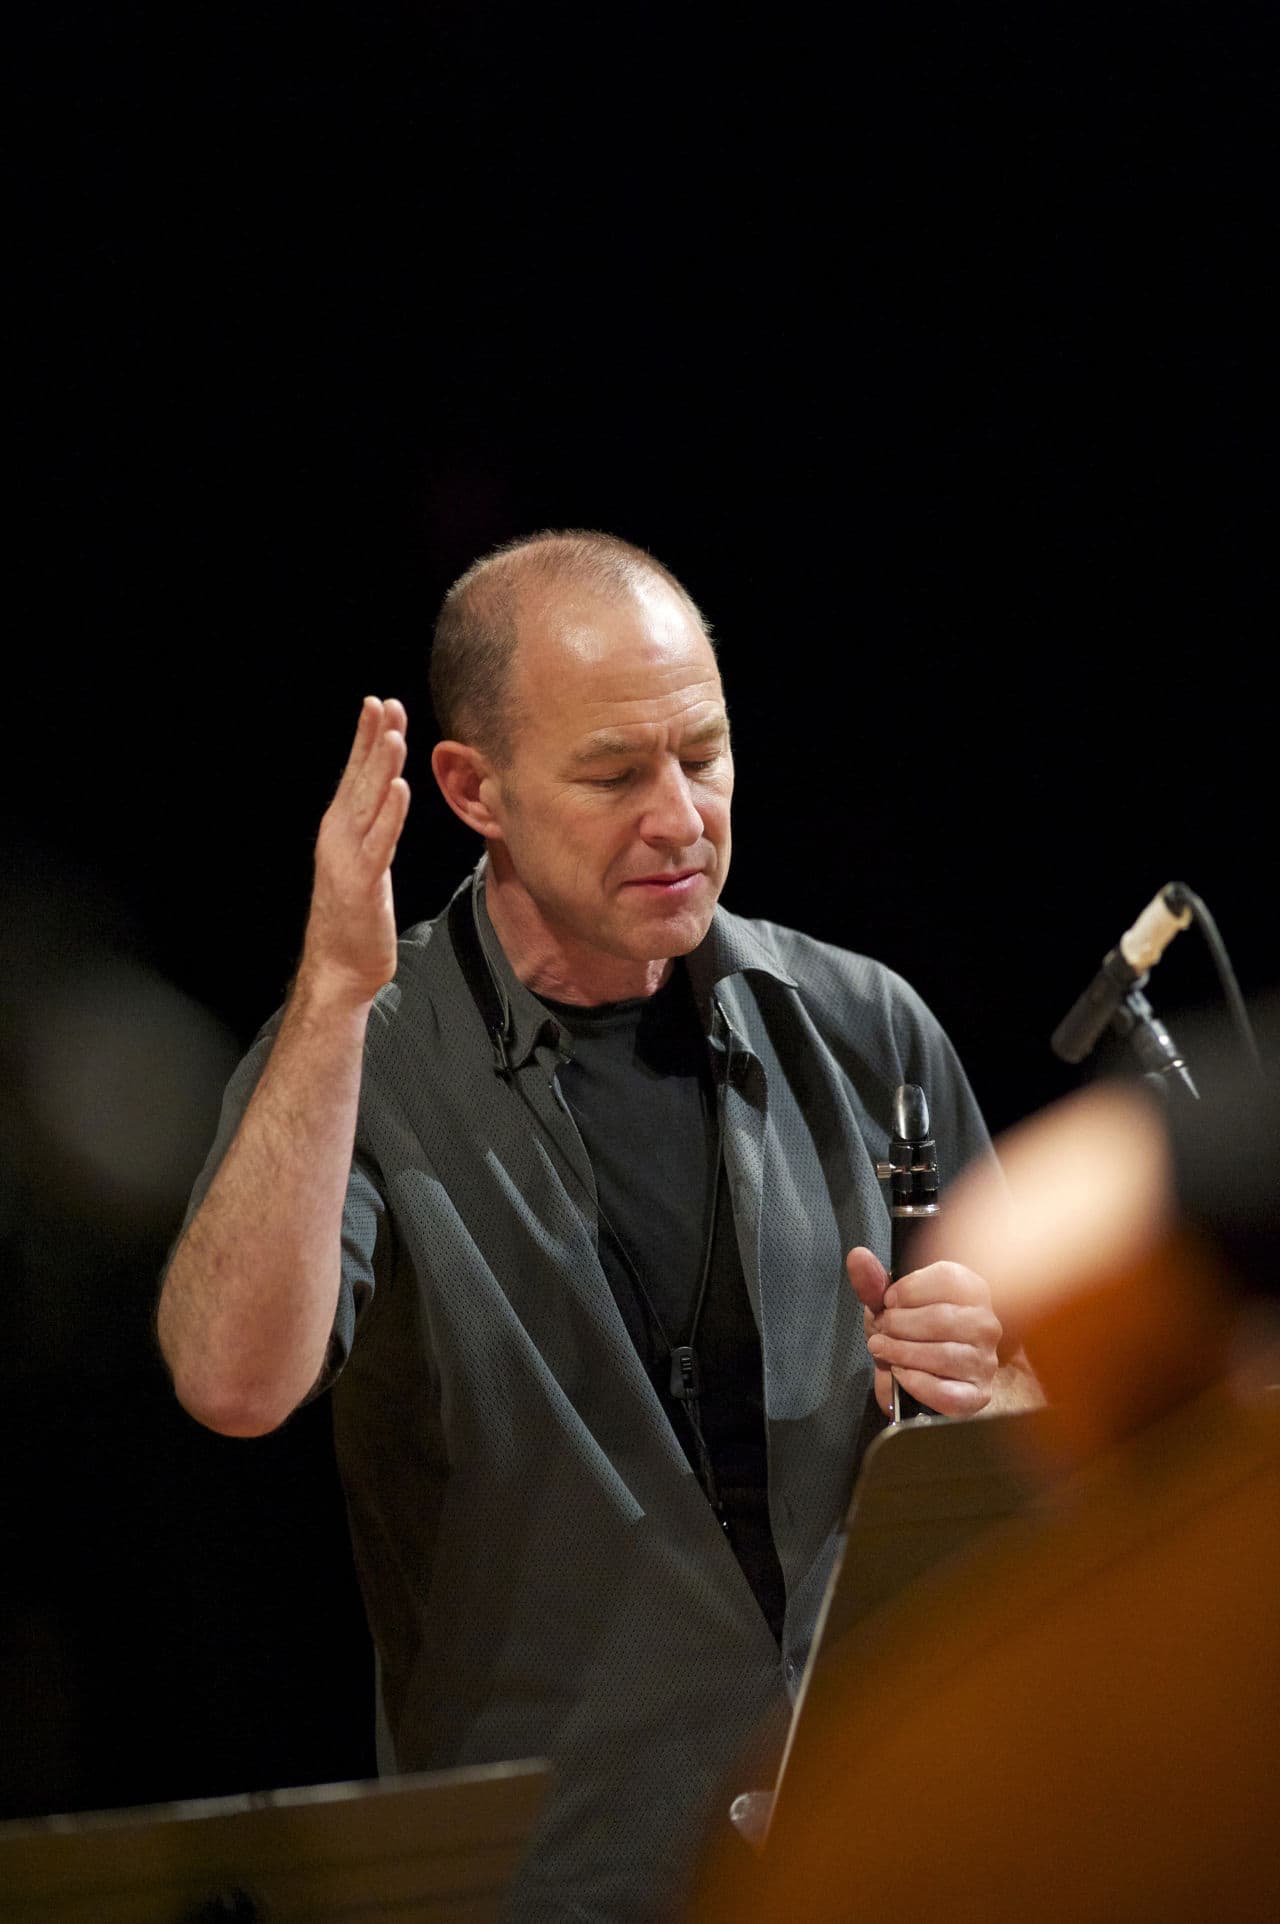 MIT professor and composer Evan Ziporyn arranged the songs being performed at MIT Sounding. (Courtesy Jensen Artists)